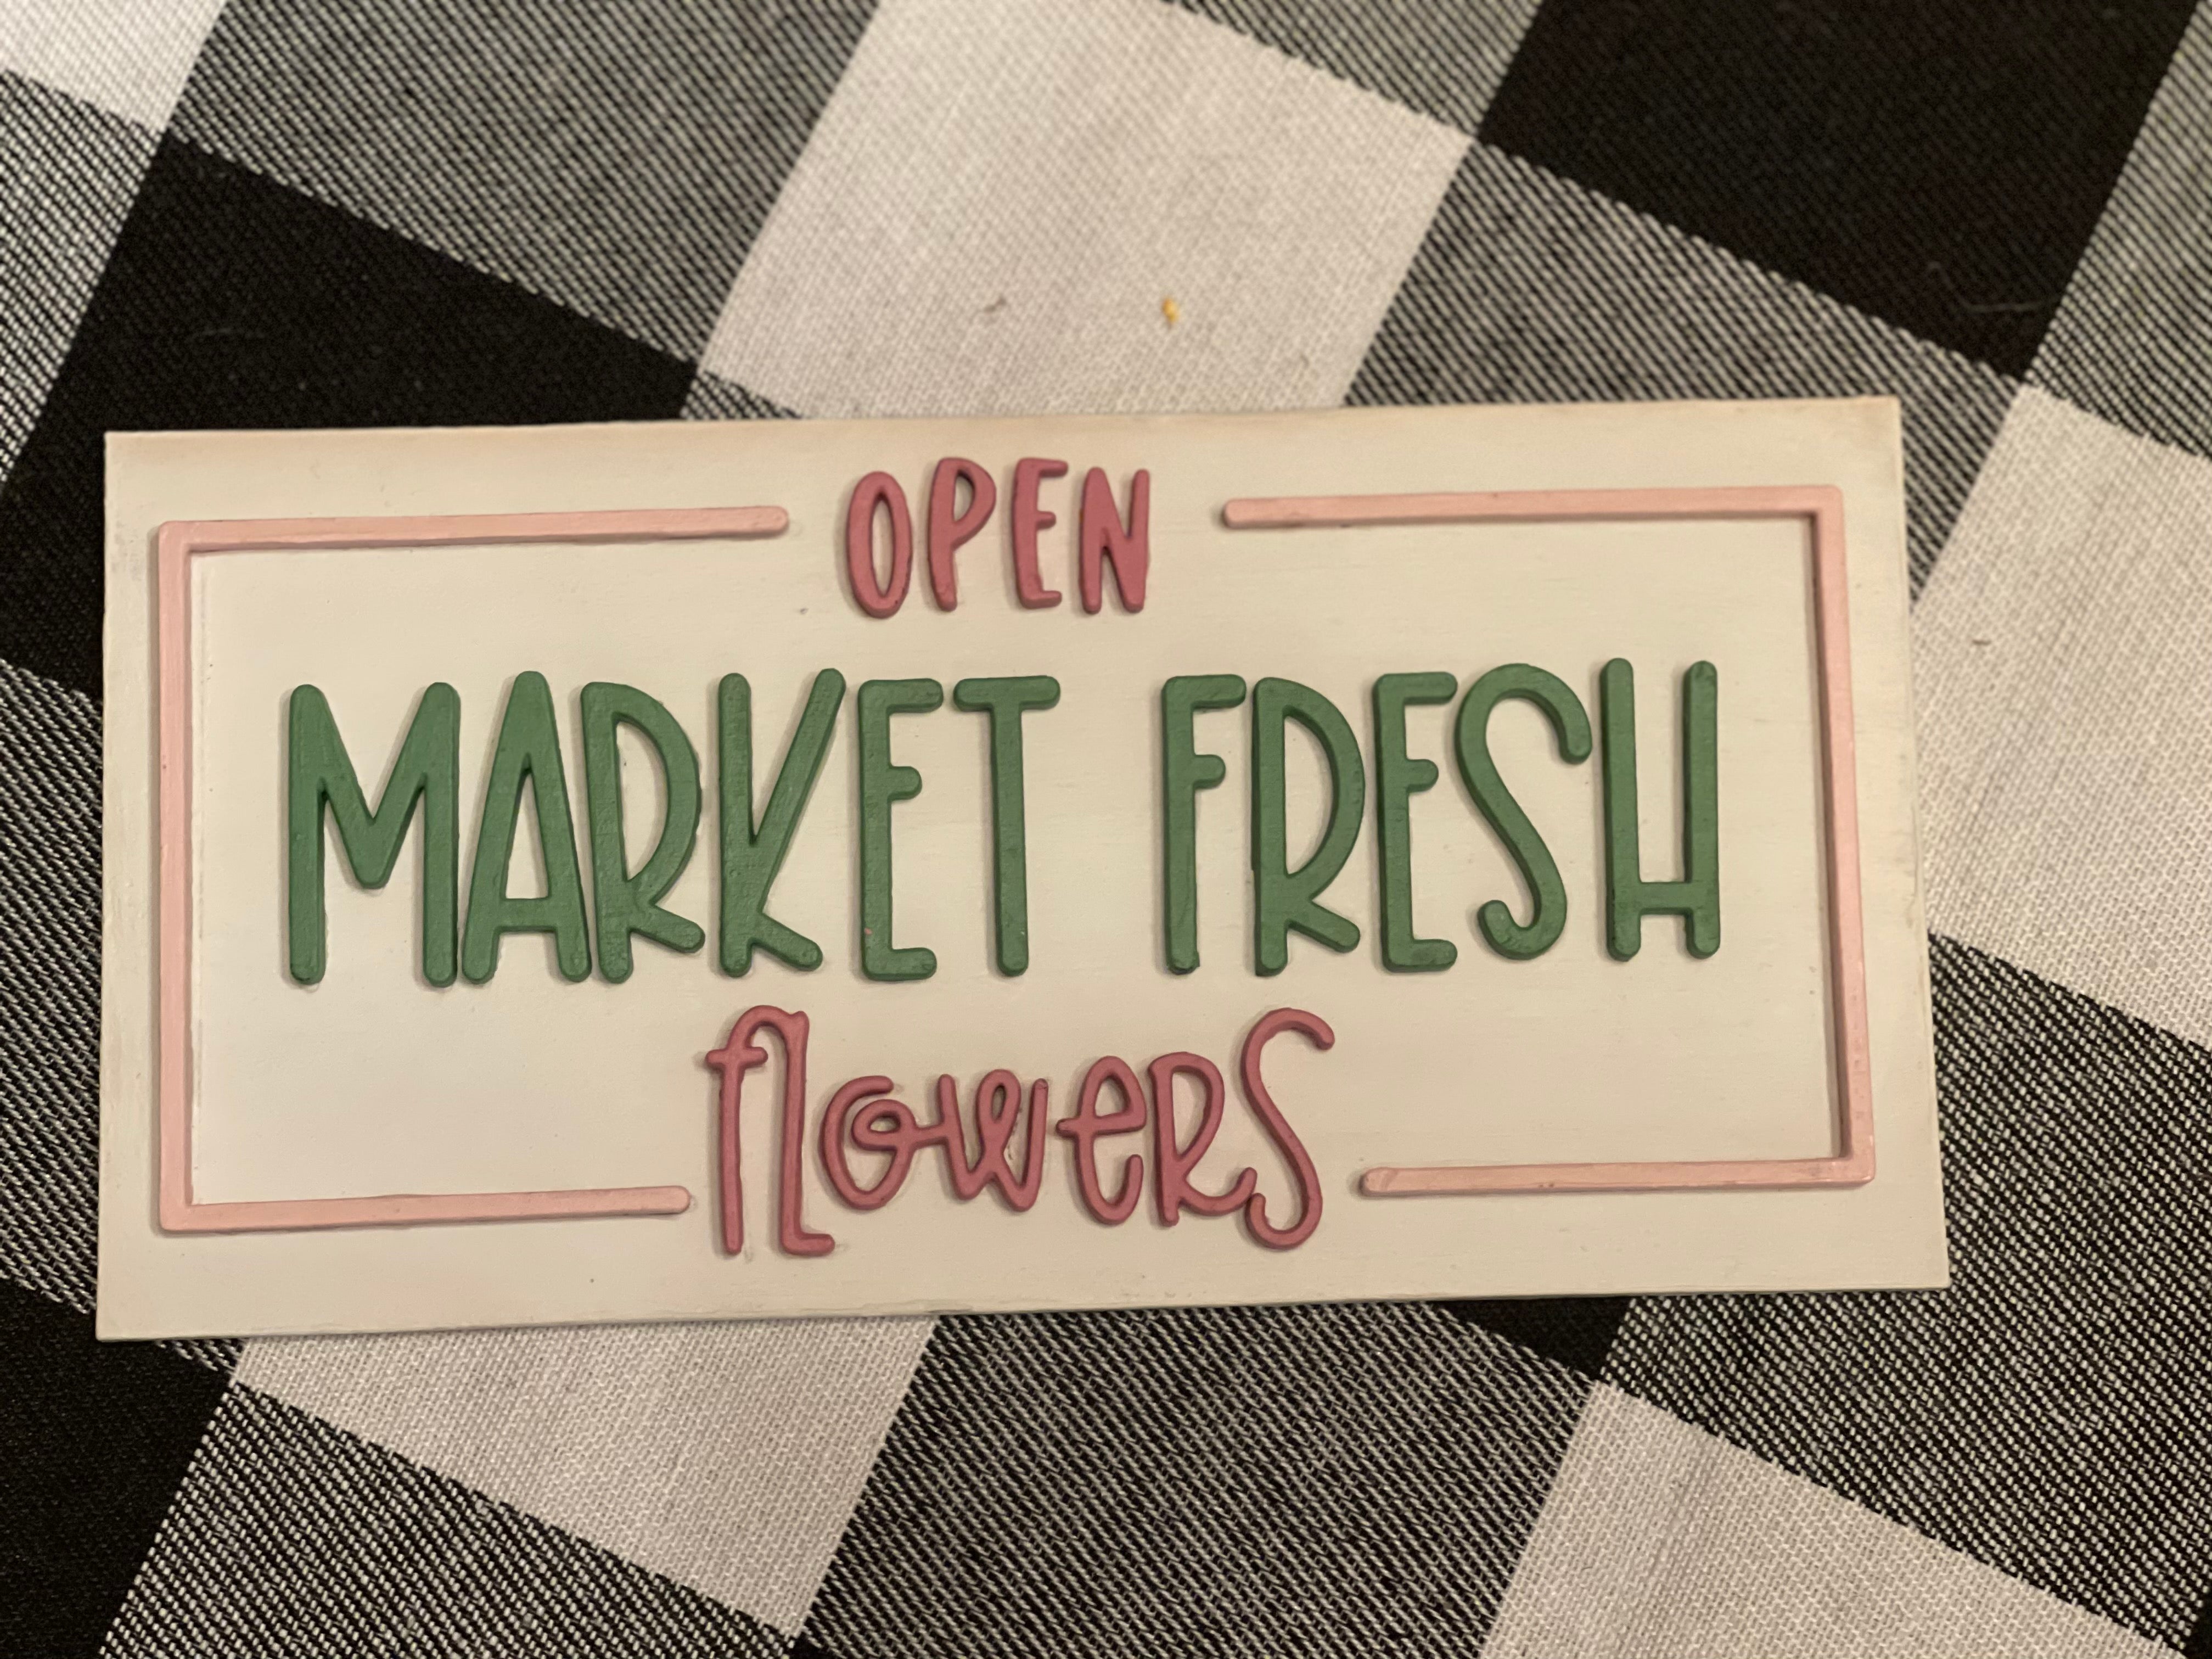 This Market Fresh Flowers Tiered Tray Sign is displayed laying on a table.